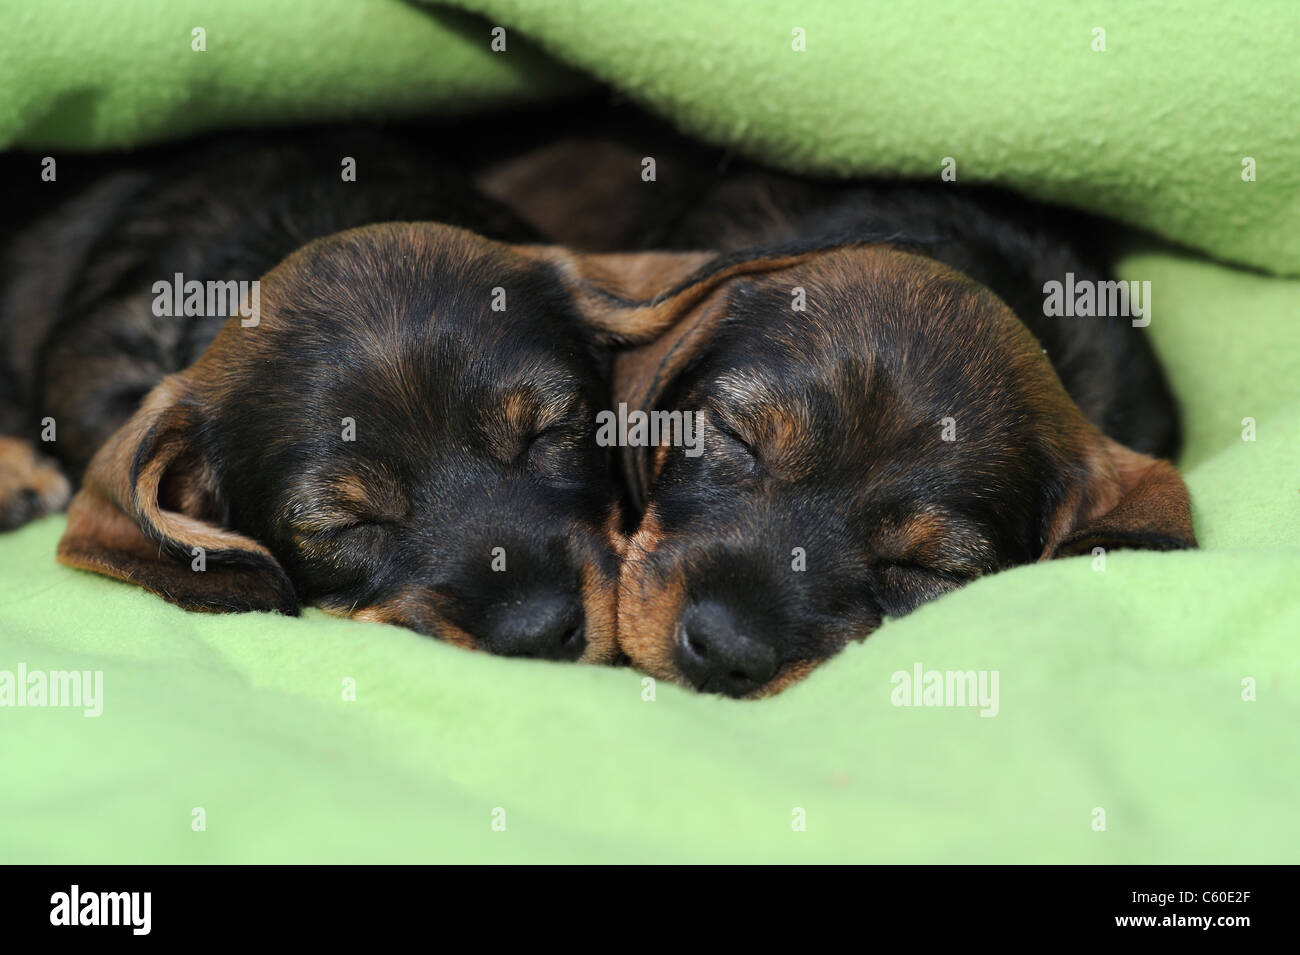 Wire-haired Dachshund (Canis lupus familiaris). Two puppies sleeping in a green blanket. Stock Photo